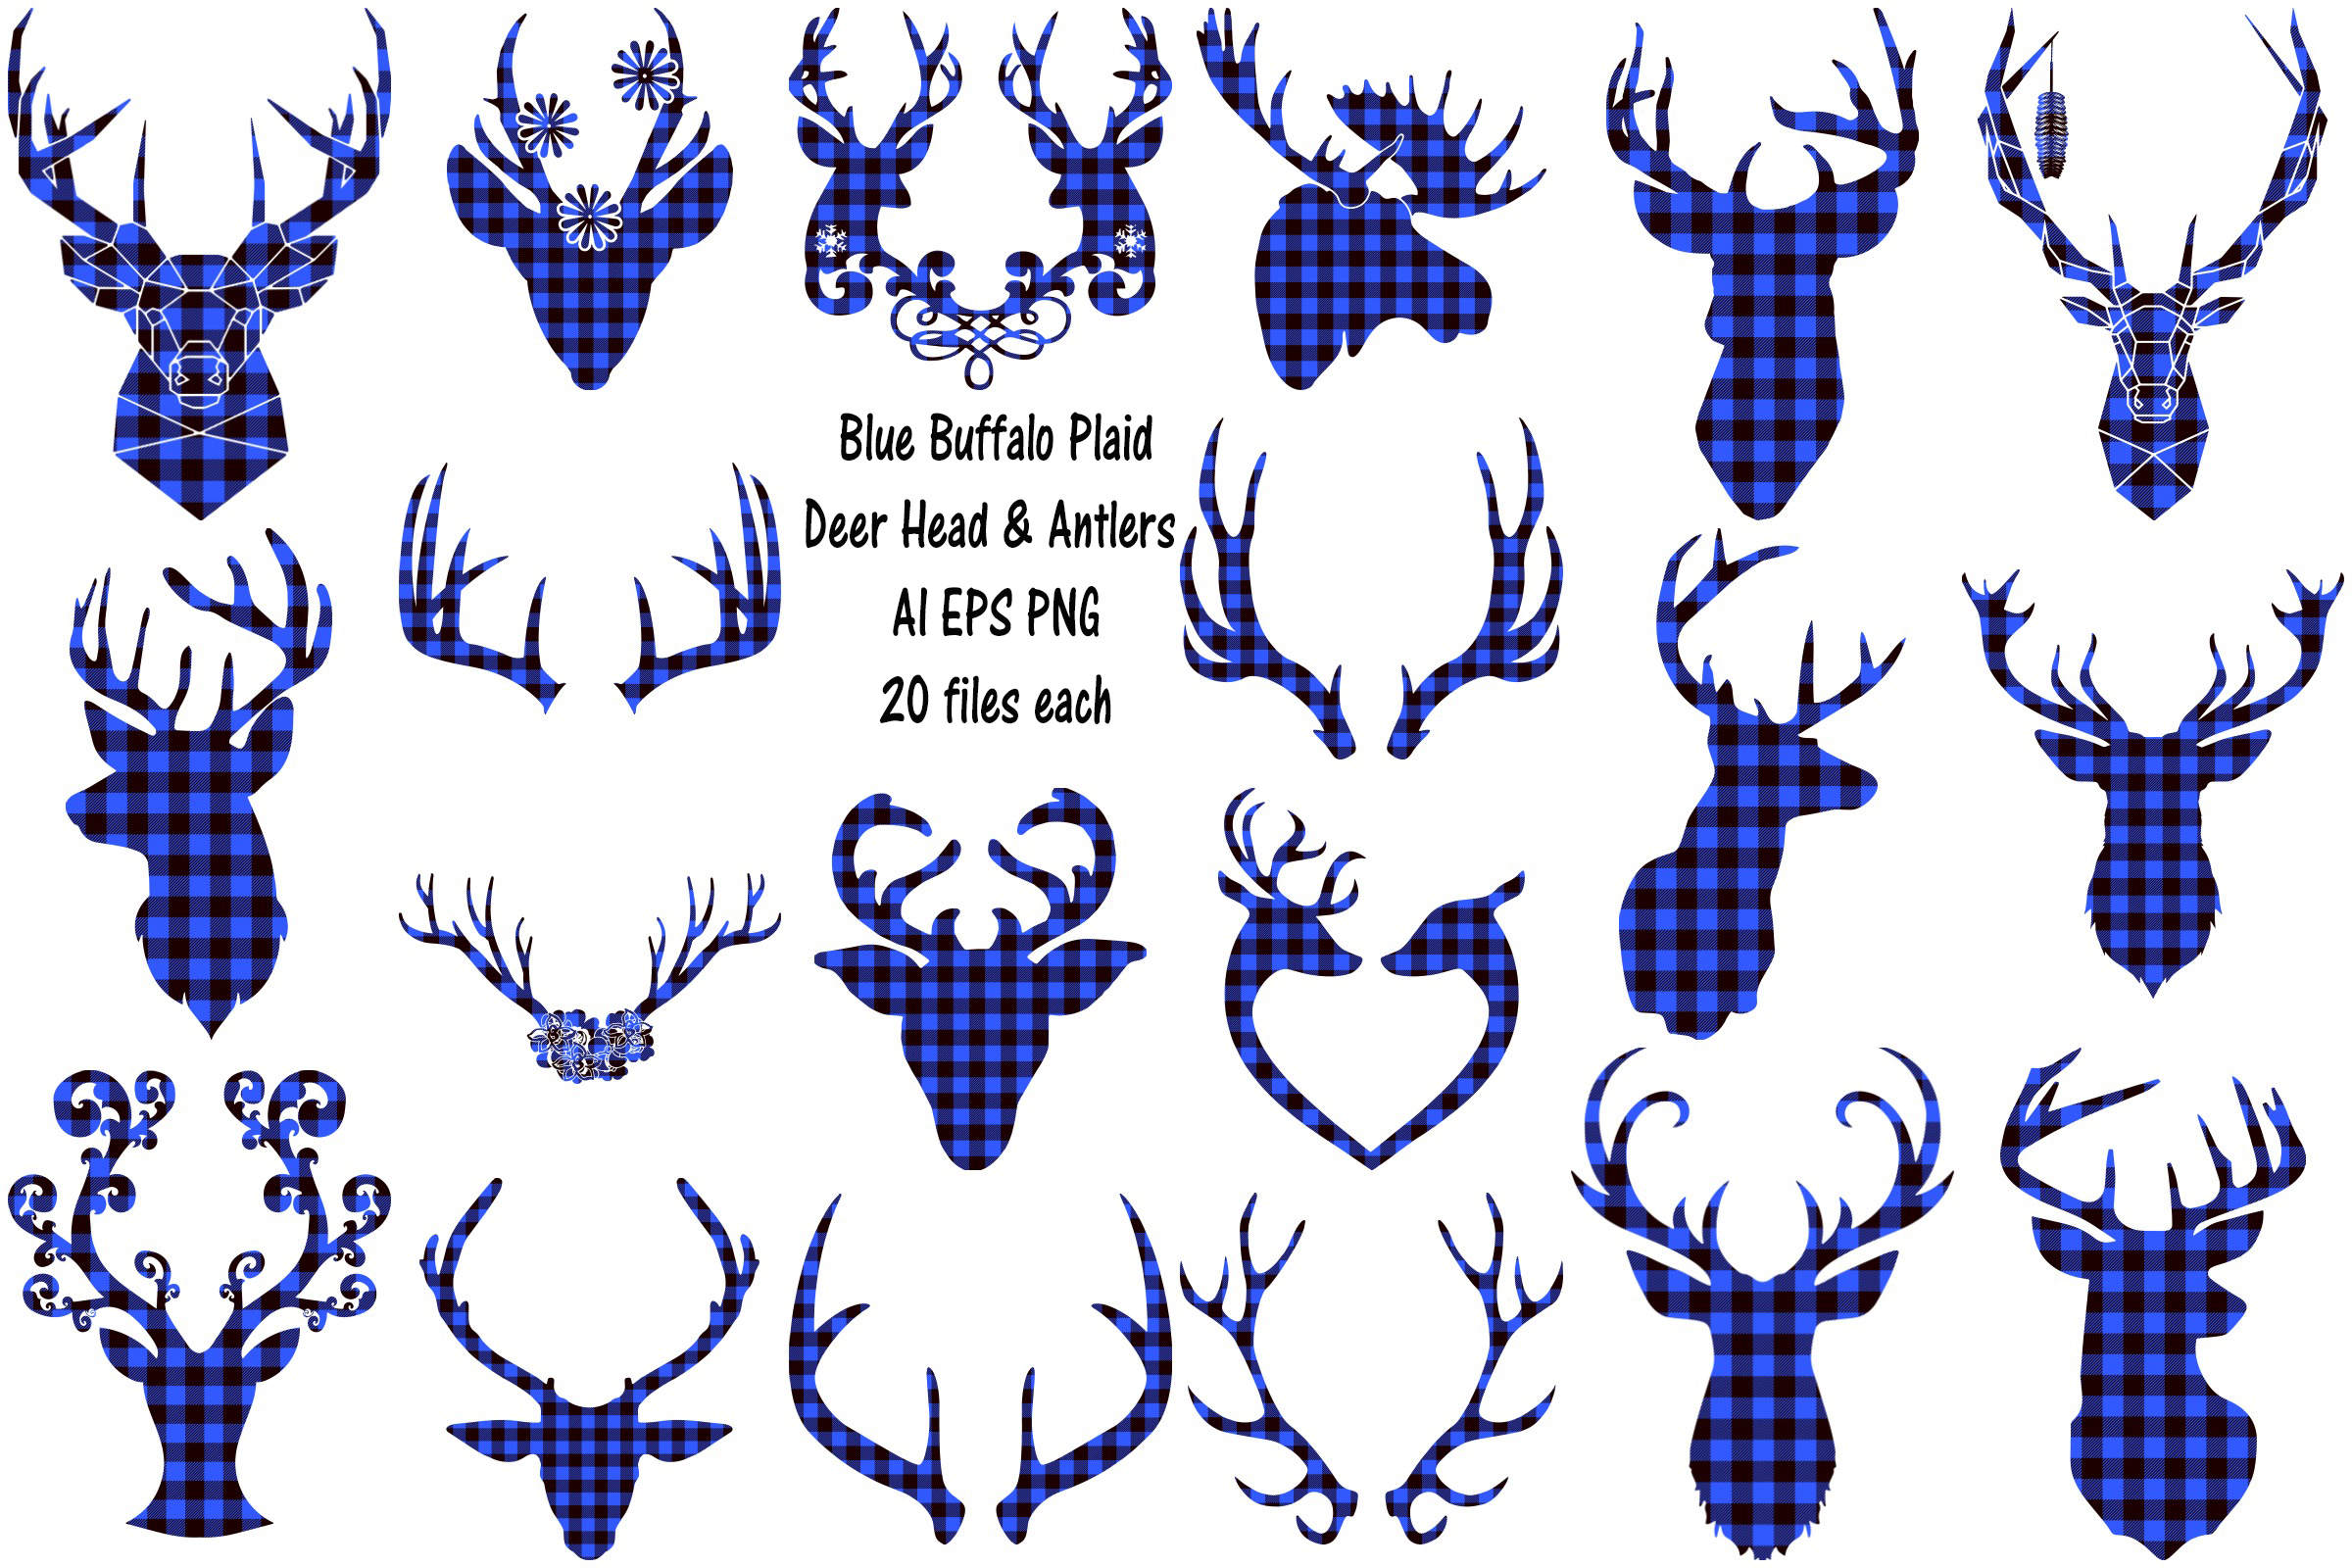 Download Blue Buffalo Plaid Deer Head and Antlers AI EPS PNG